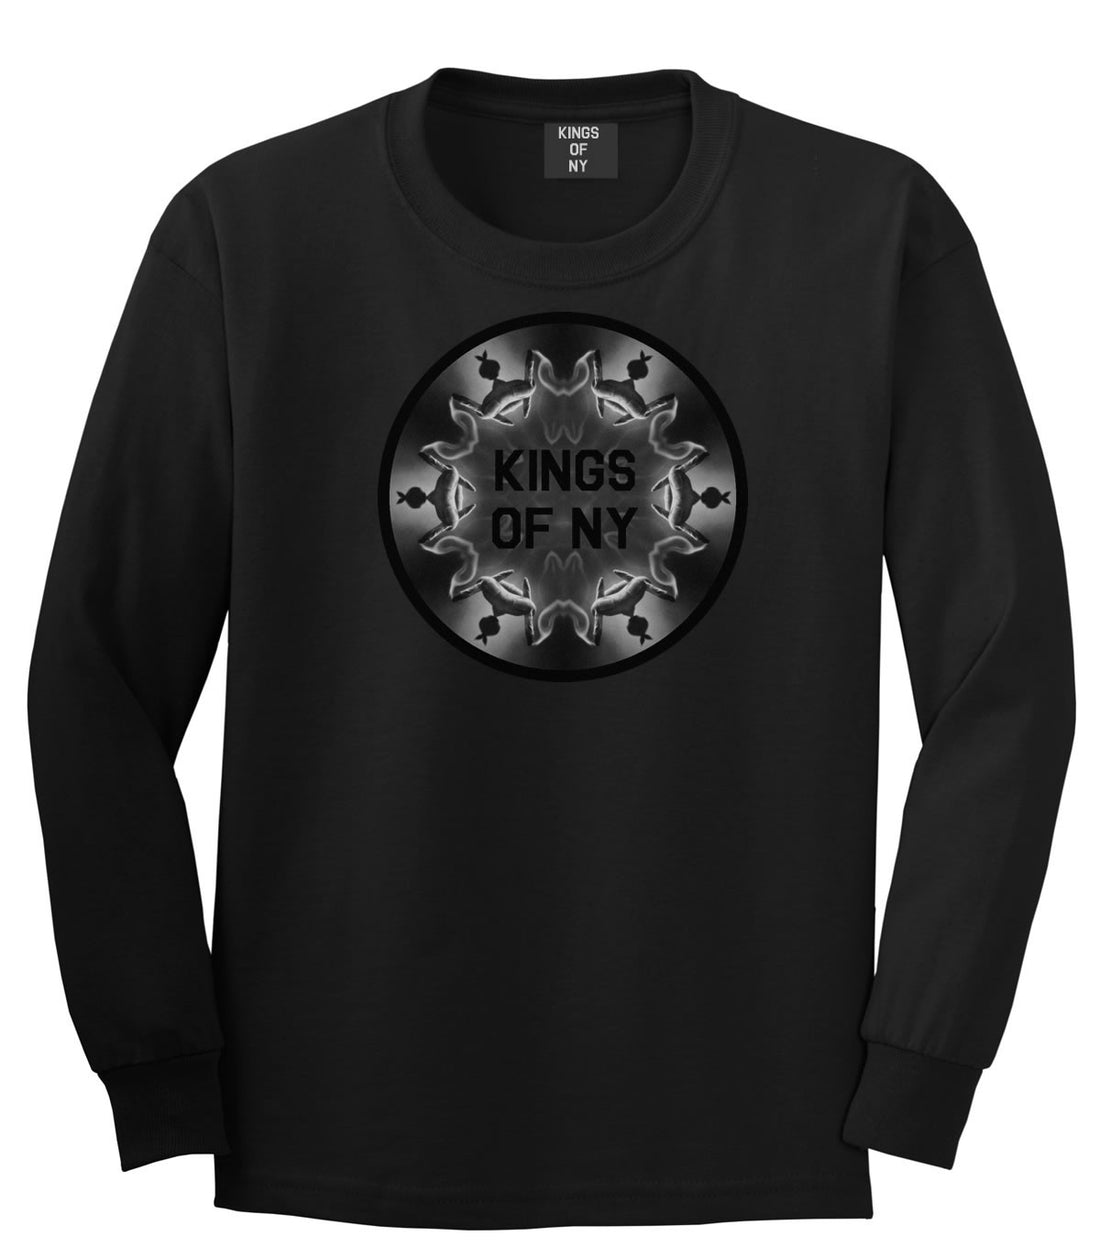 Pass That Blunt Long Sleeve T-Shirt in Black By Kings Of NY